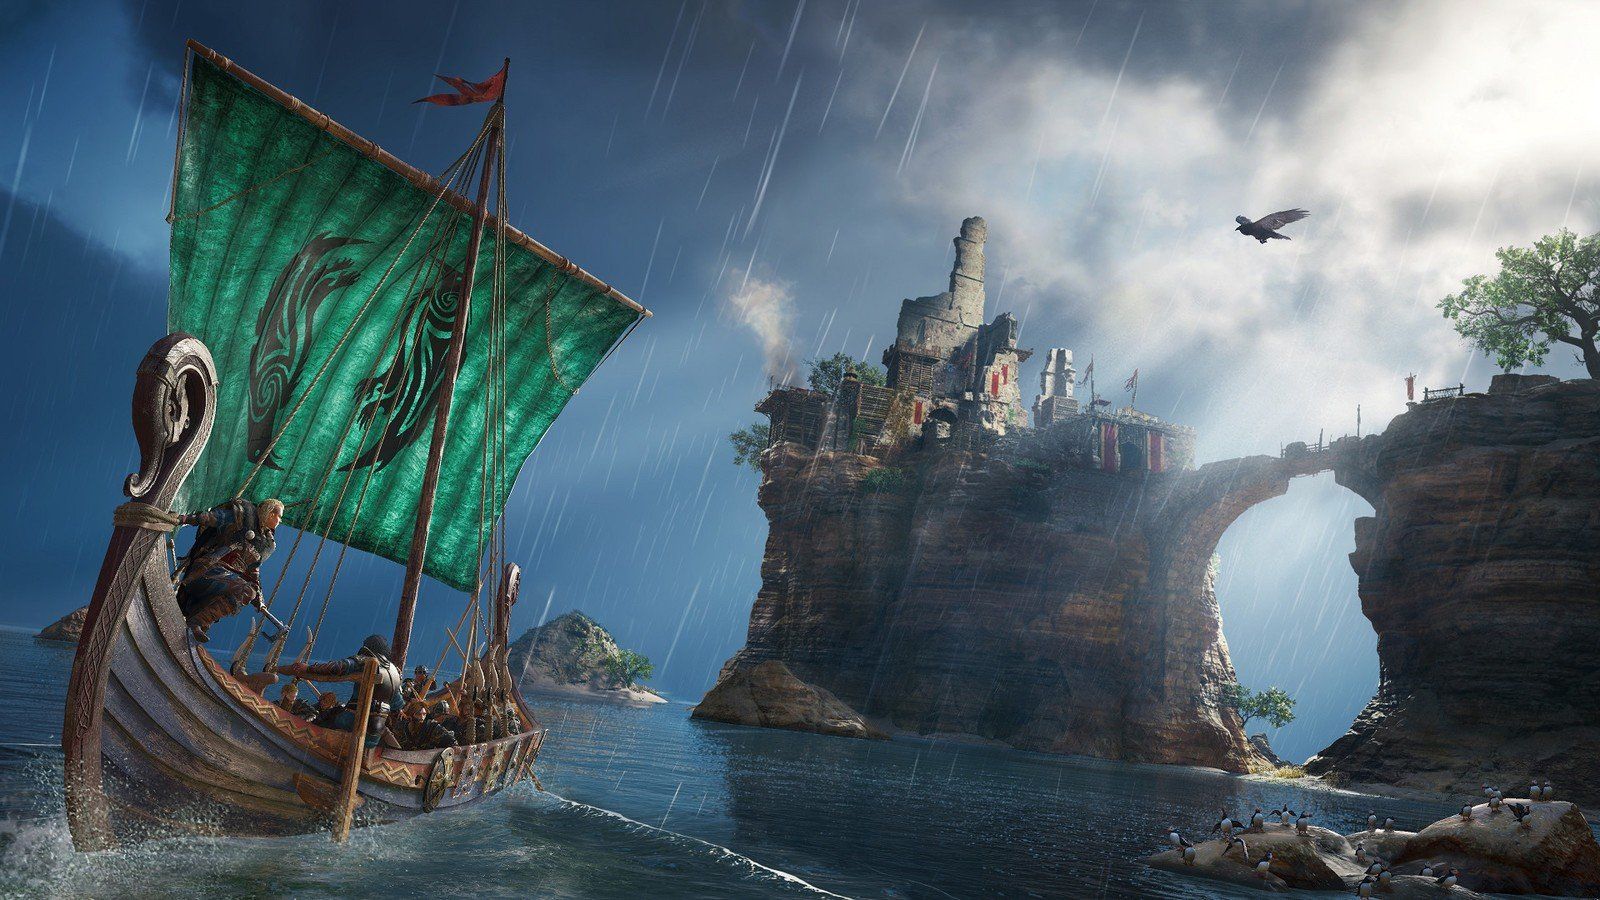 Does Assassin's Creed Valhalla have naval combat?